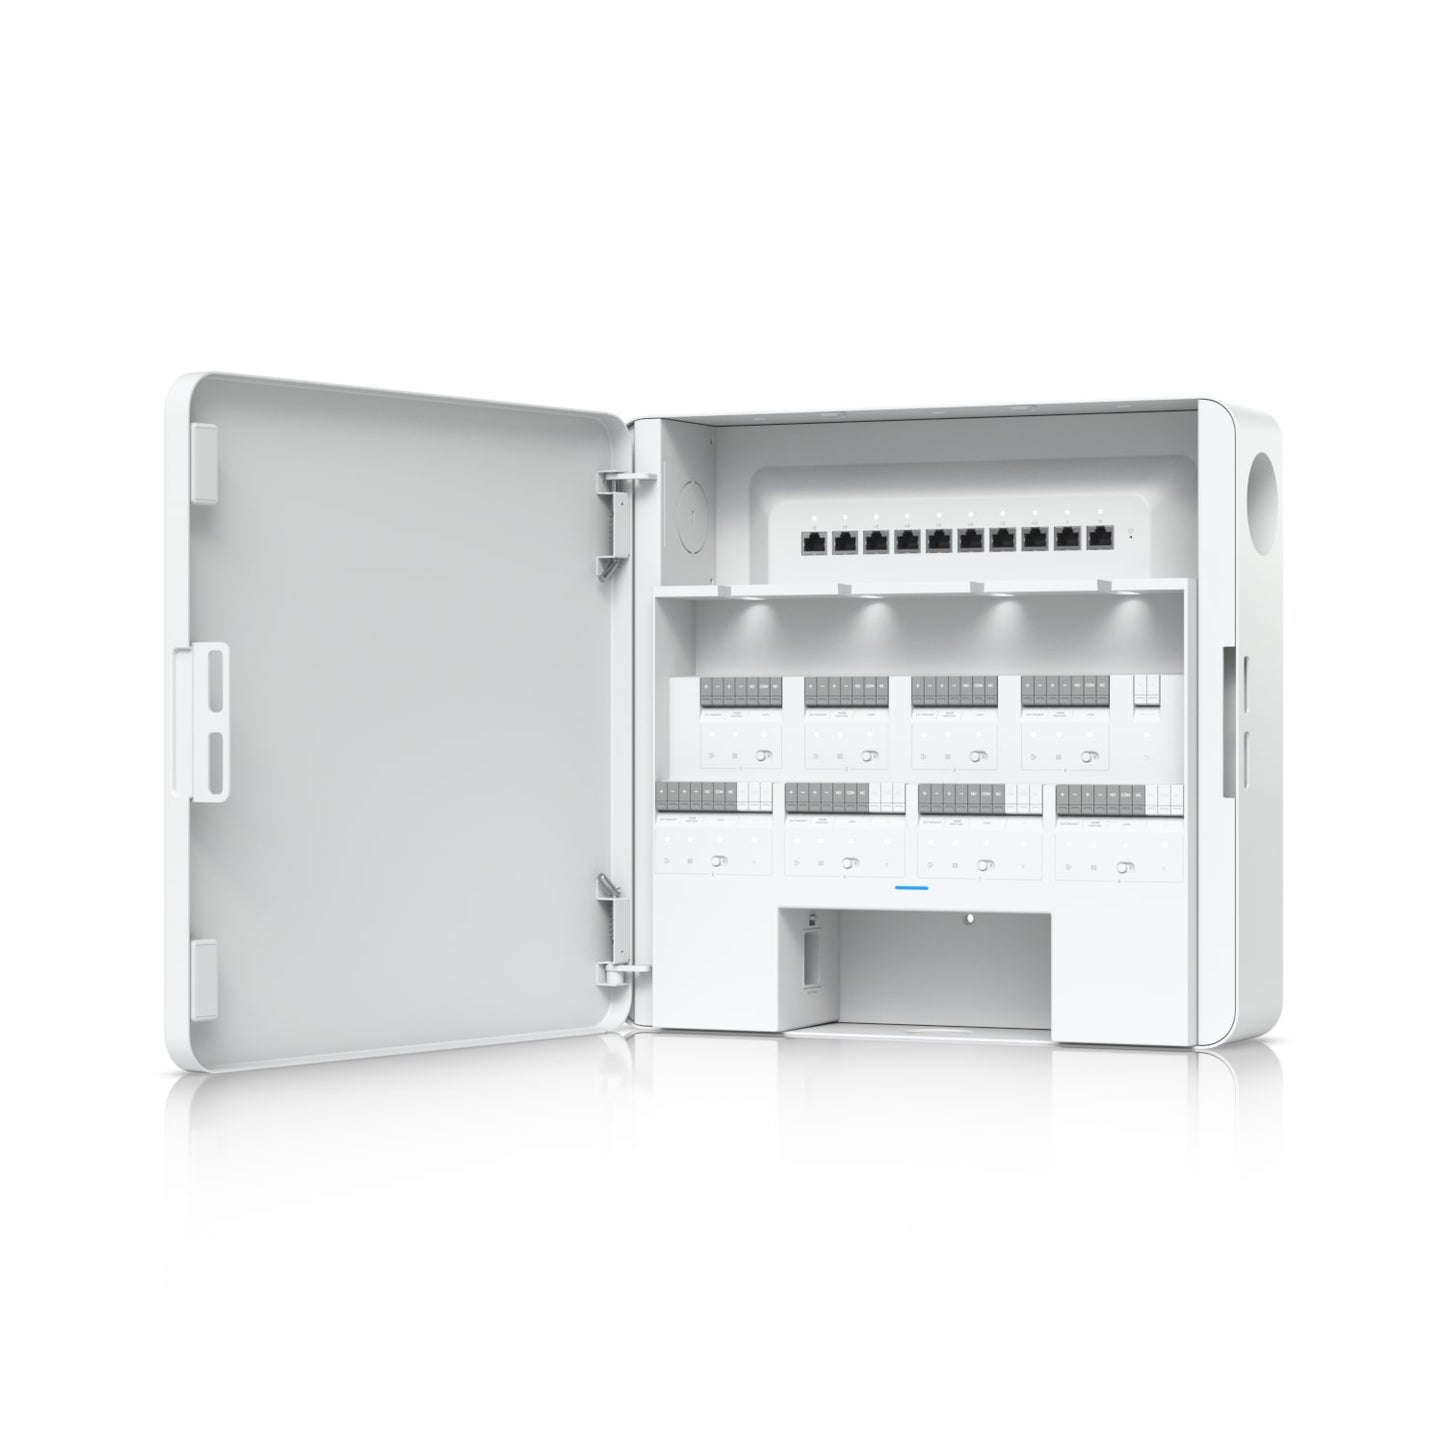 Ubiquiti Enterprise Access Hub, With Entry And Exit Control to Eight Doors, Battery Backup Support, (8) Lock terminals (12V or Dry), 2Yr Warr EAH-8